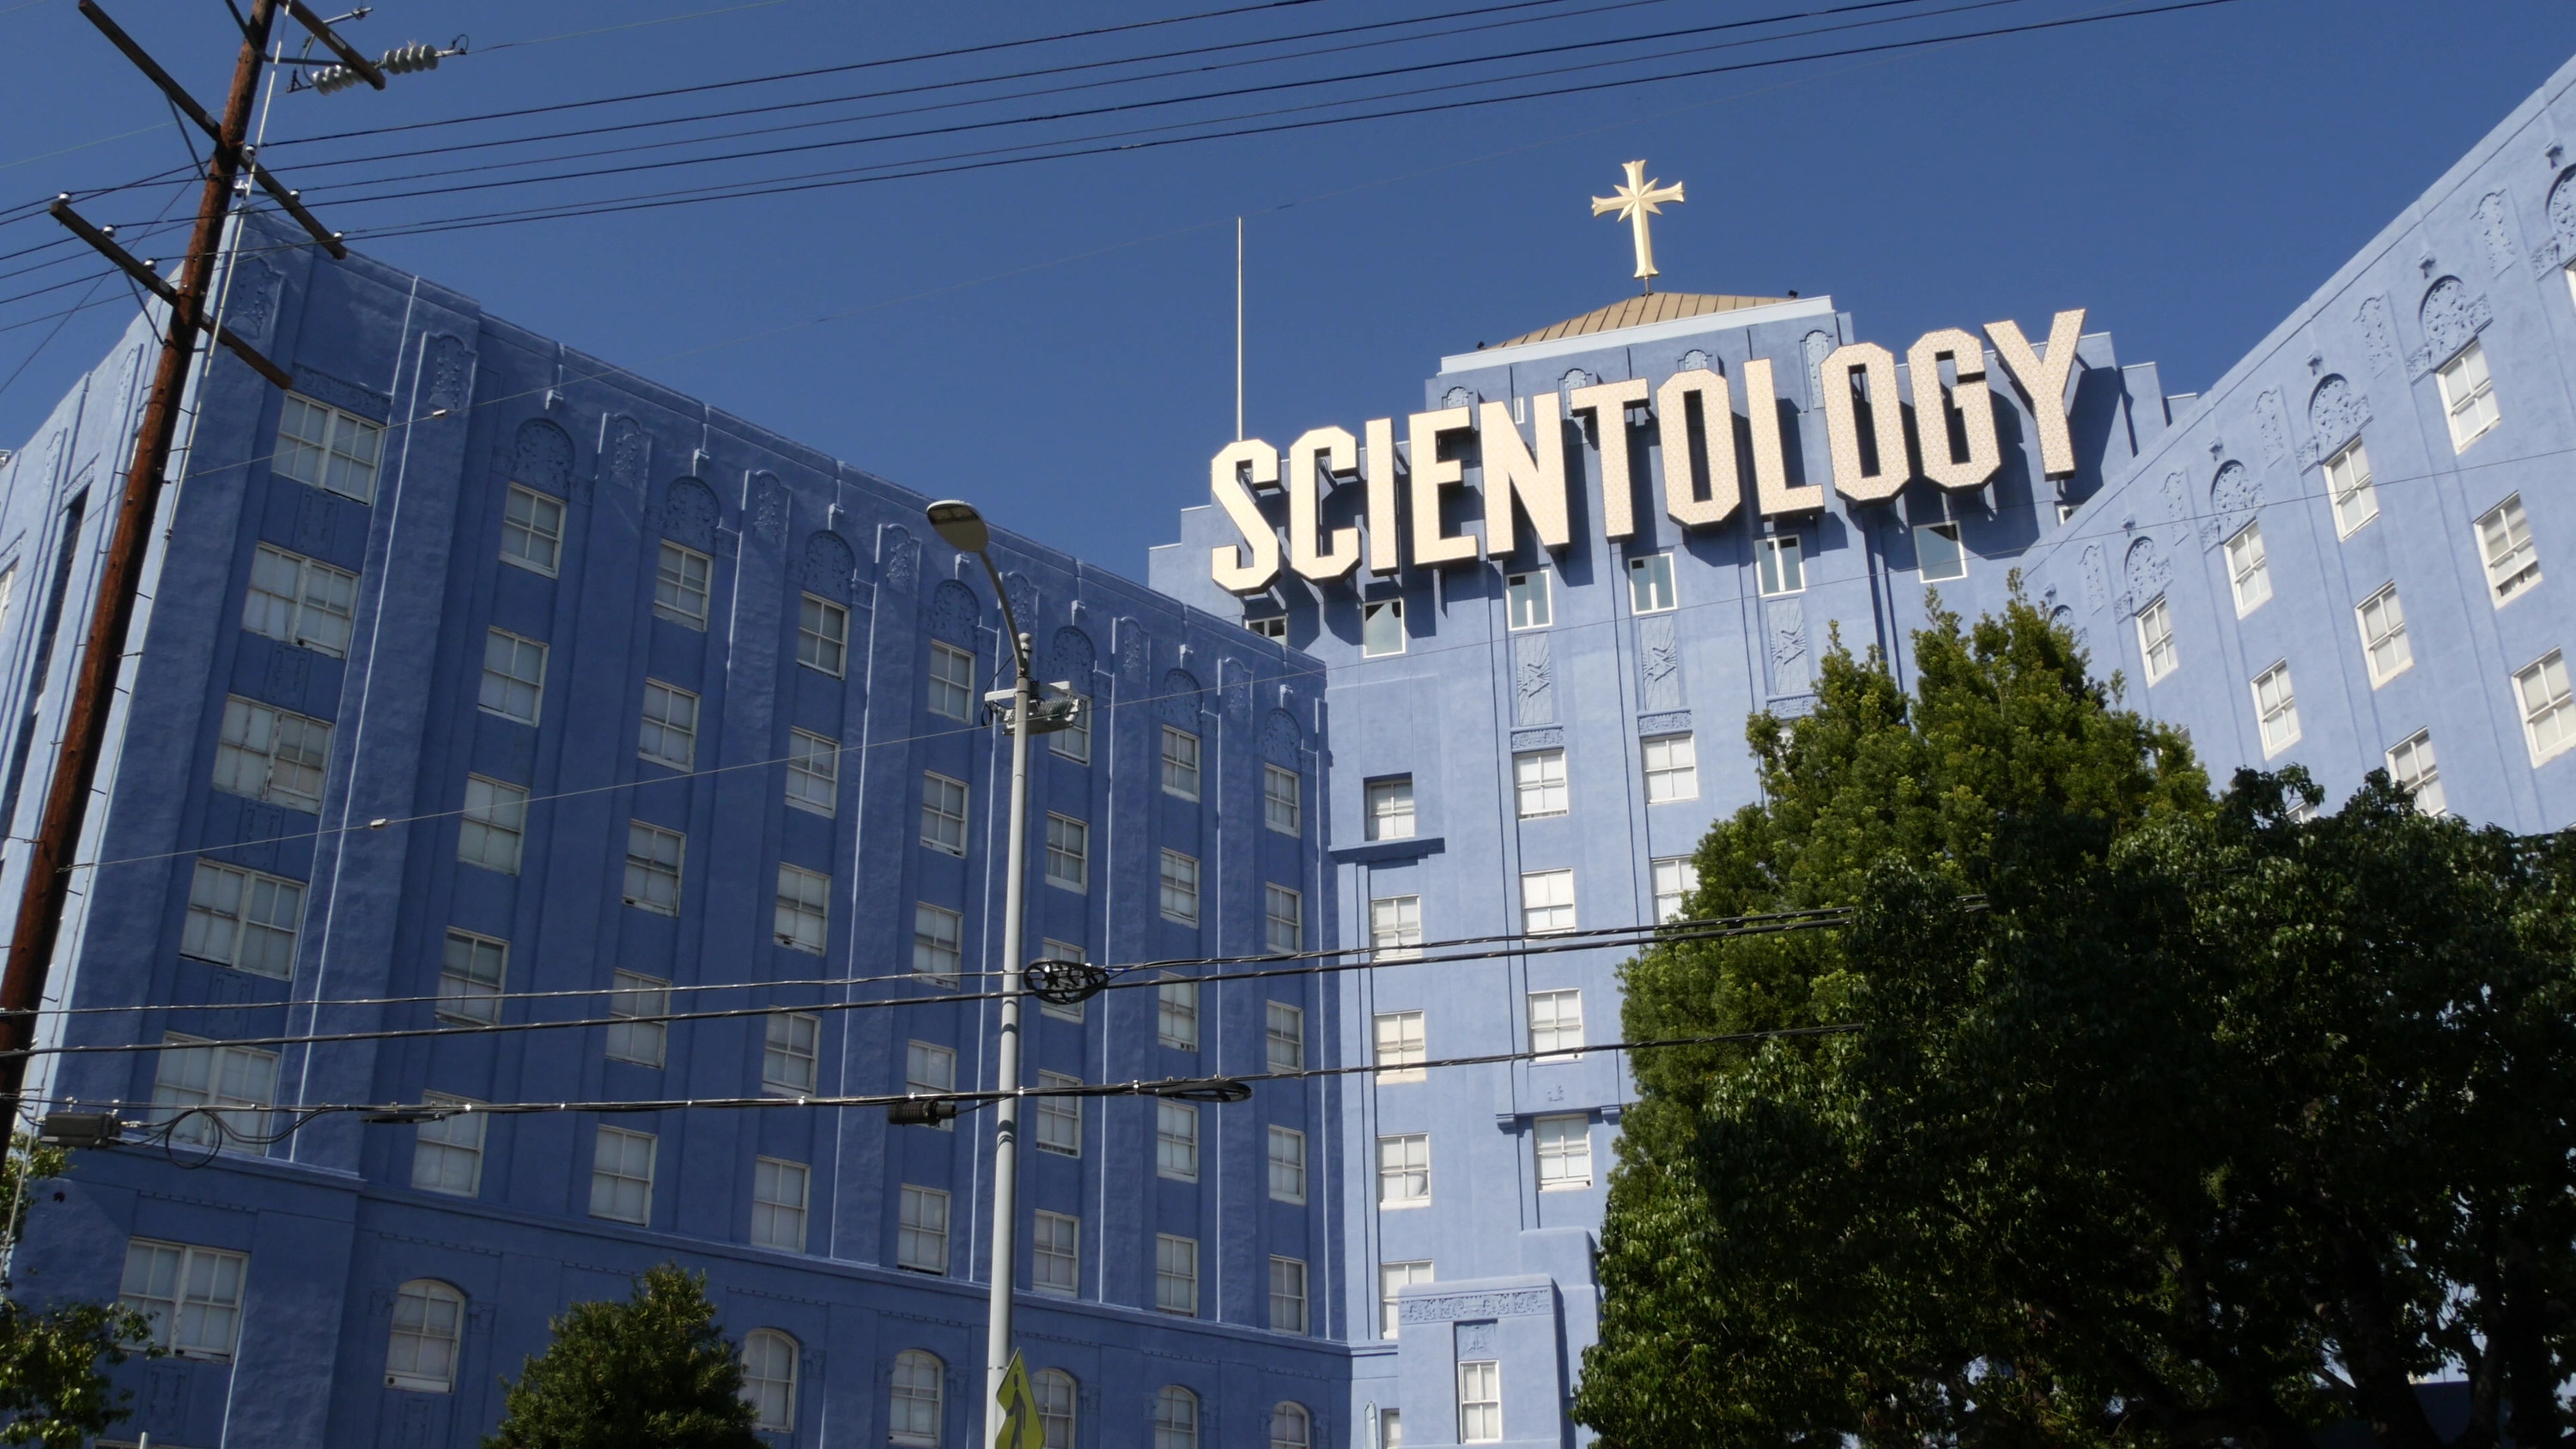 The Church of Scientology exterior